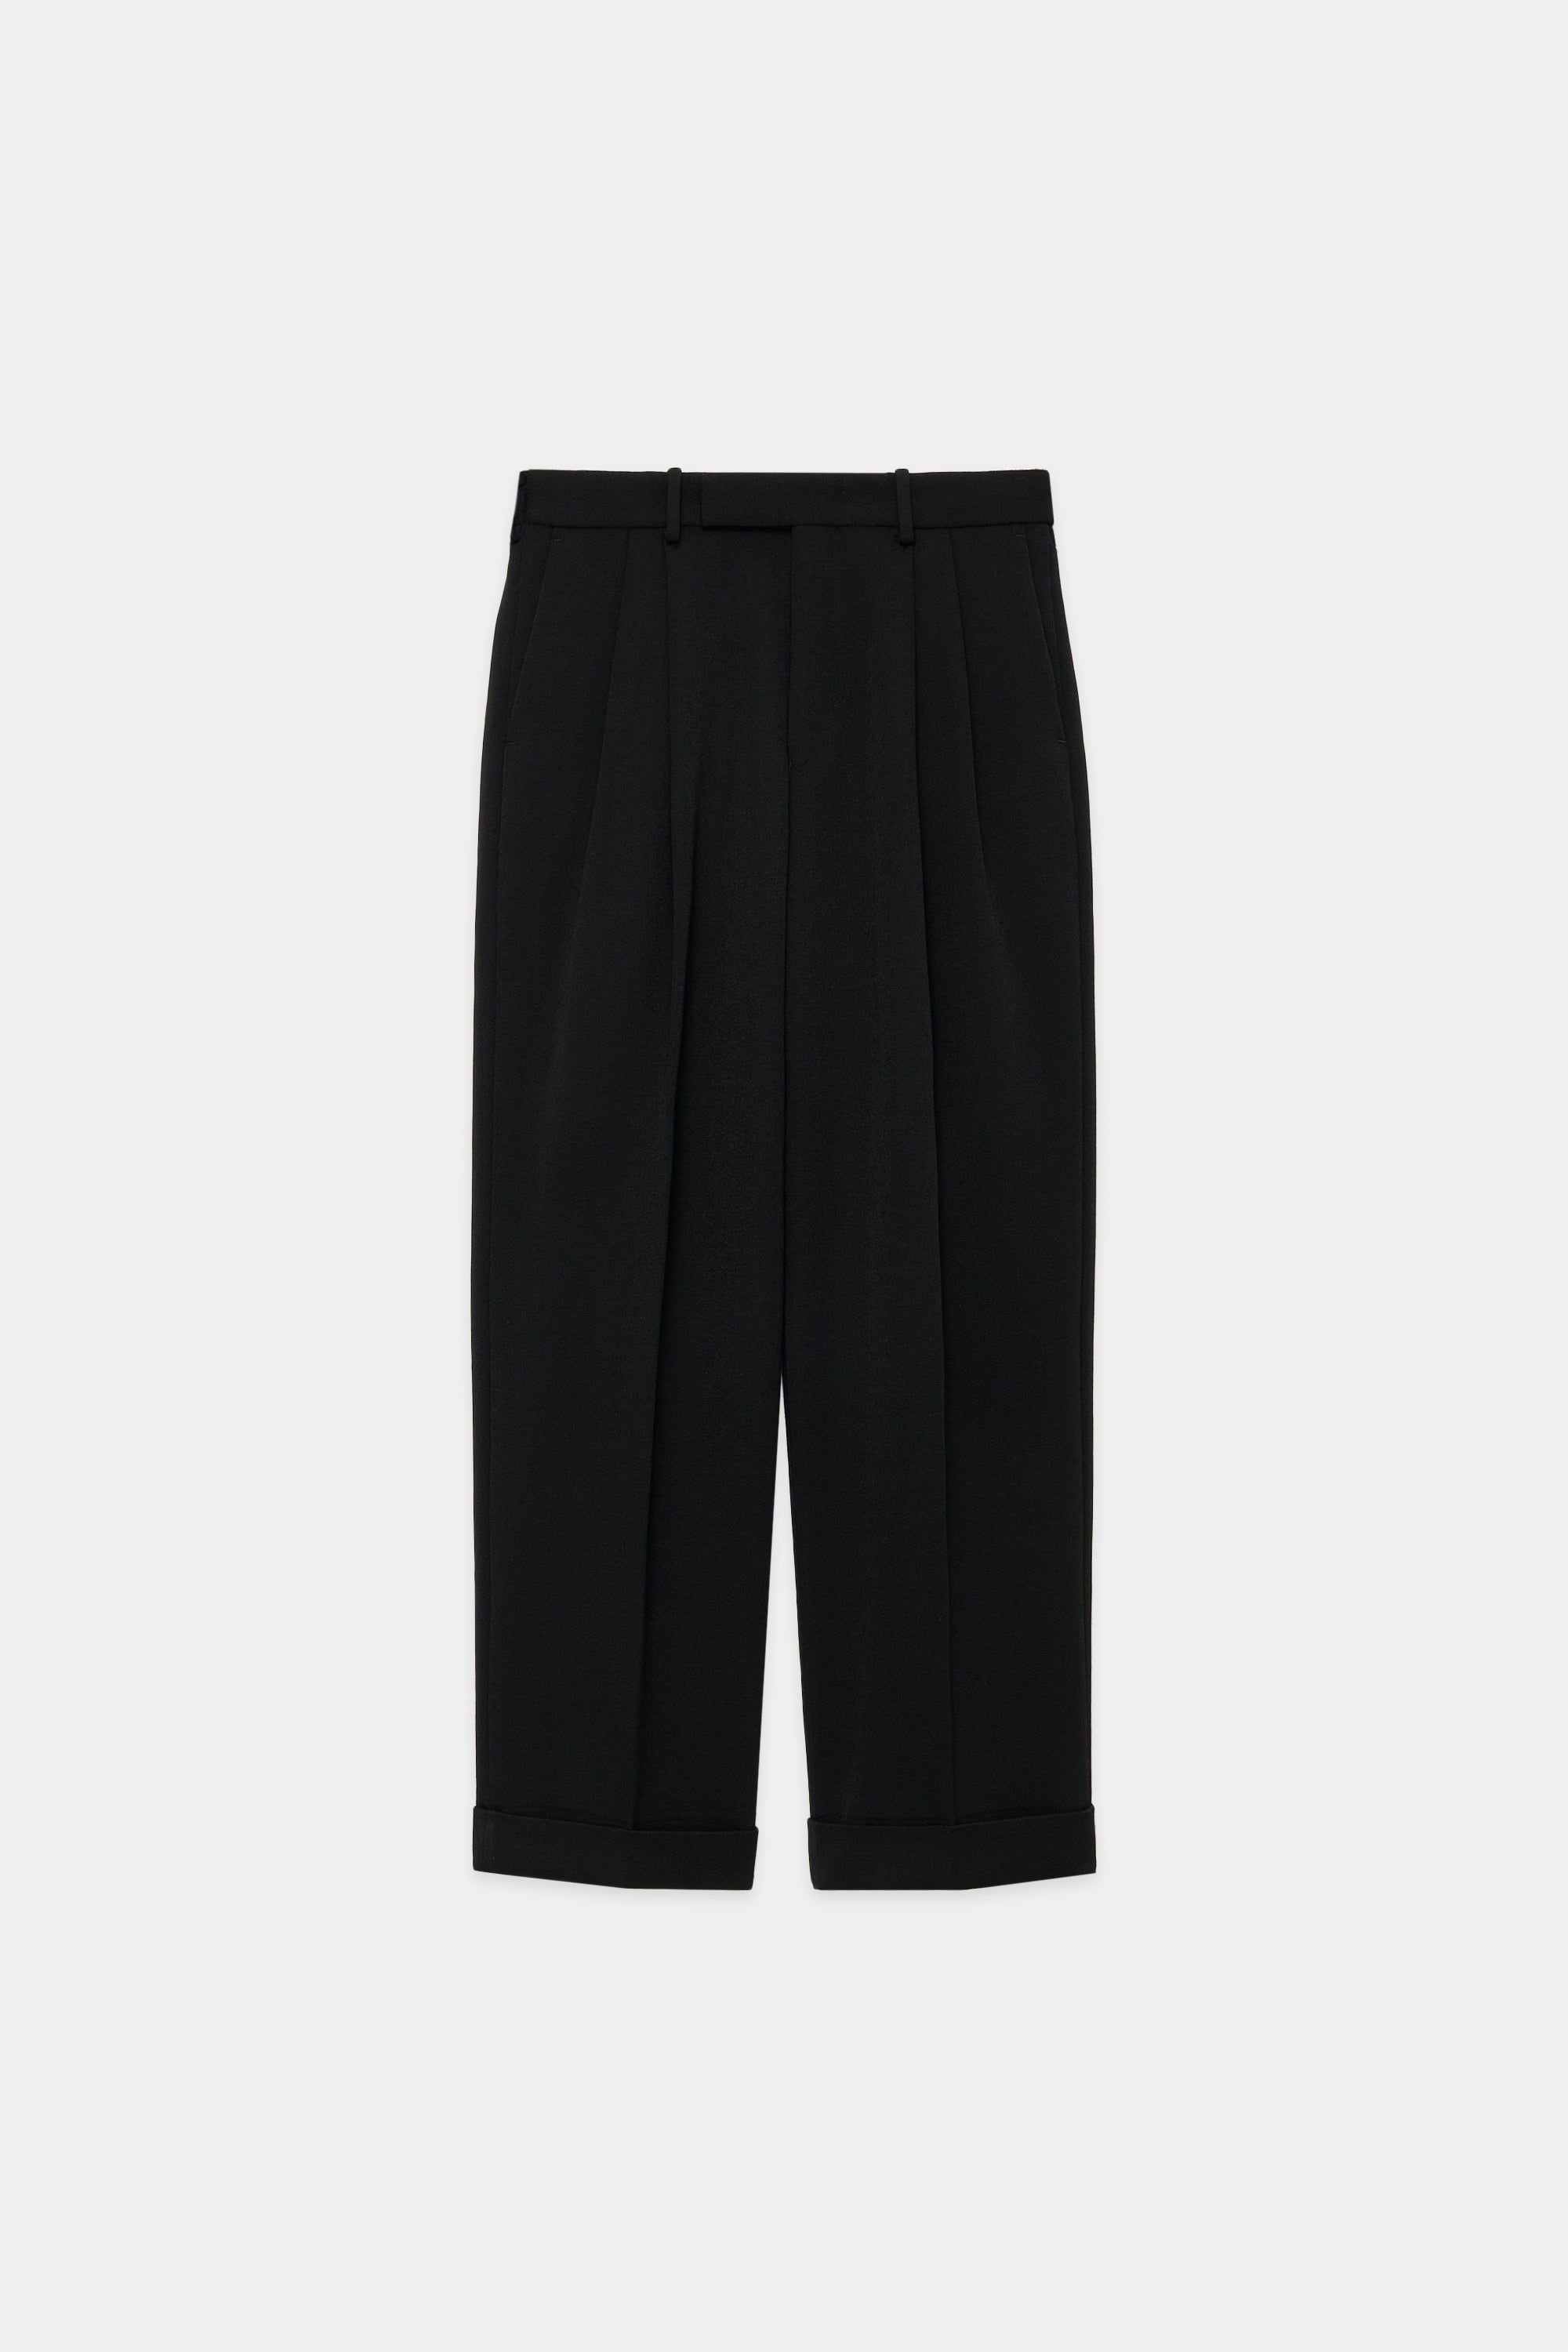 ORGANIC WOOL TAXEED CLOTH DOUBLE PLEATED CLASSIC WIDE TROUSERS, Black